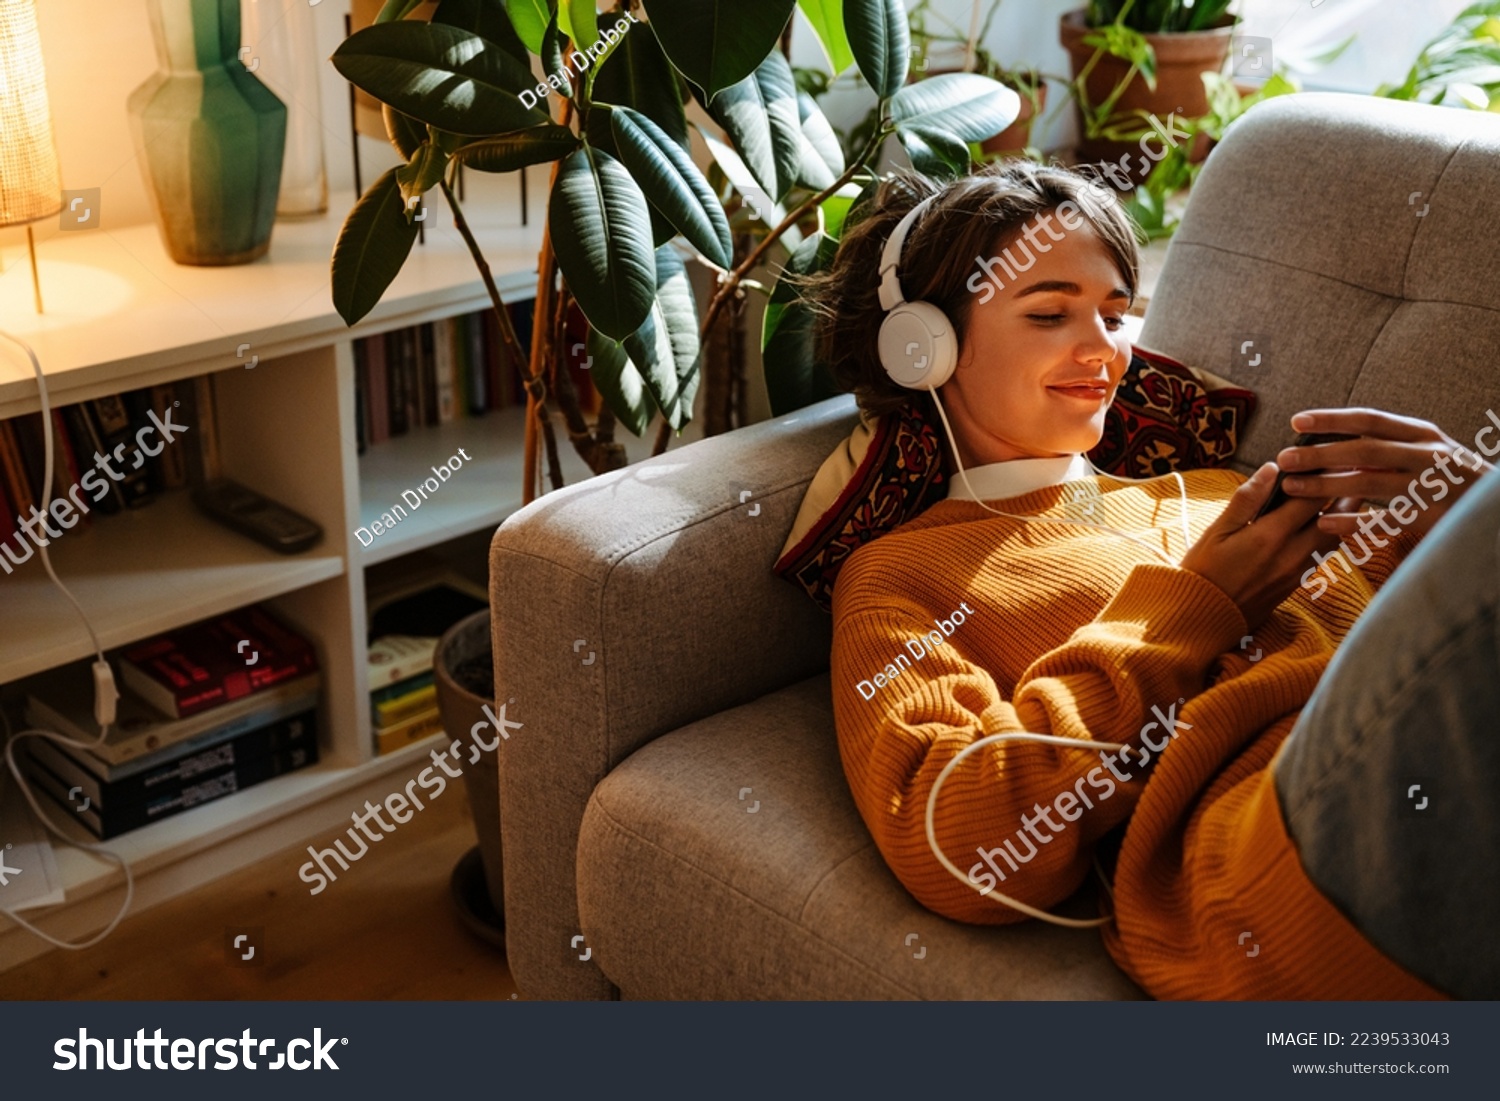 Brunette young woman listening music and using cellphone while resting on couch at home #2239533043